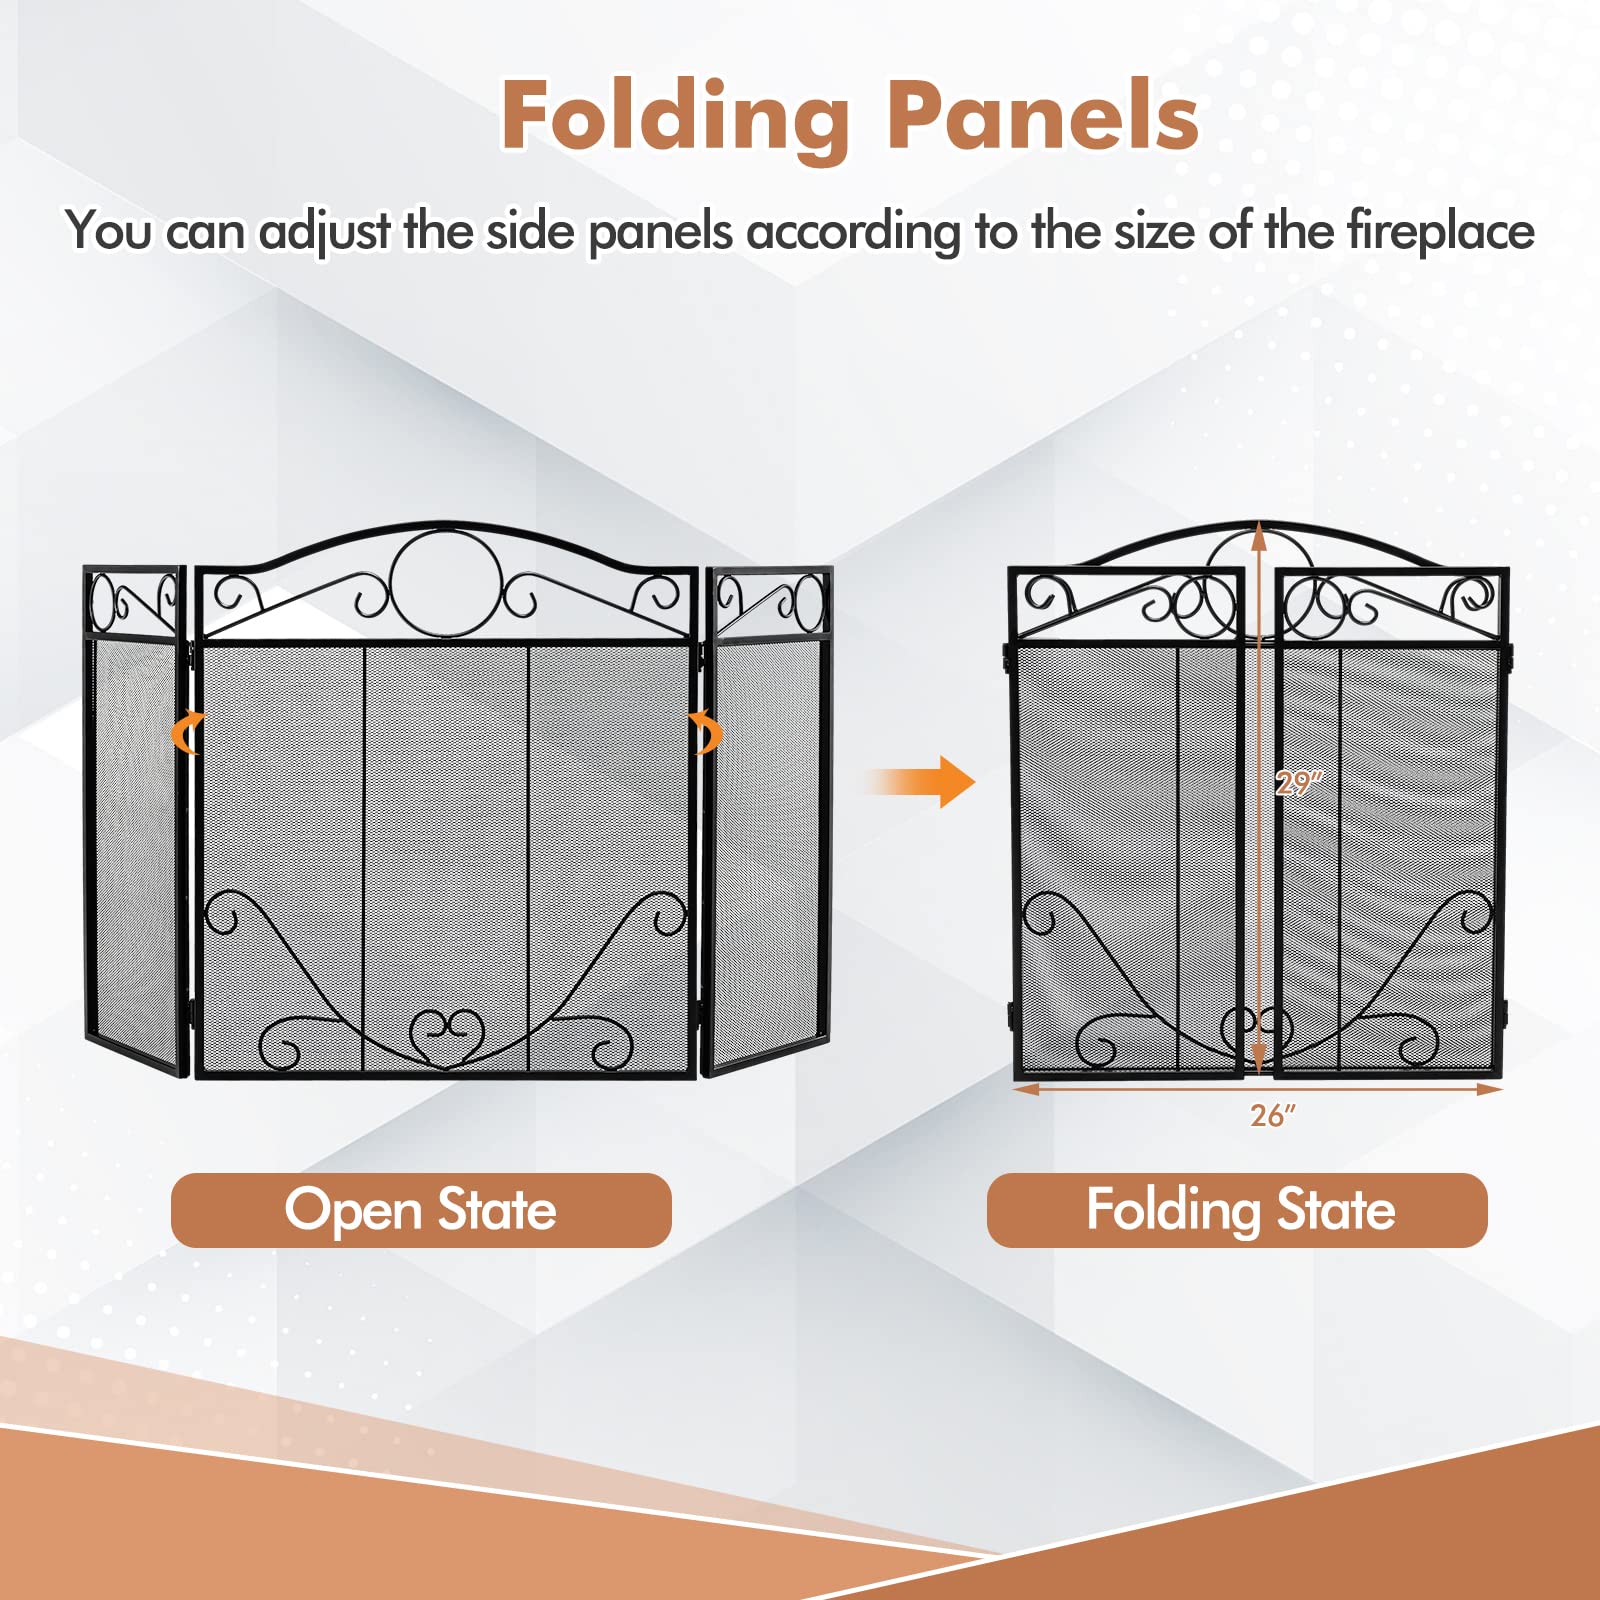 Giantex Foldable 3-Panel Fireplace Screen Black - 50x29 Inch No Assembly Required Freestanding Steel Mesh Fire Screen